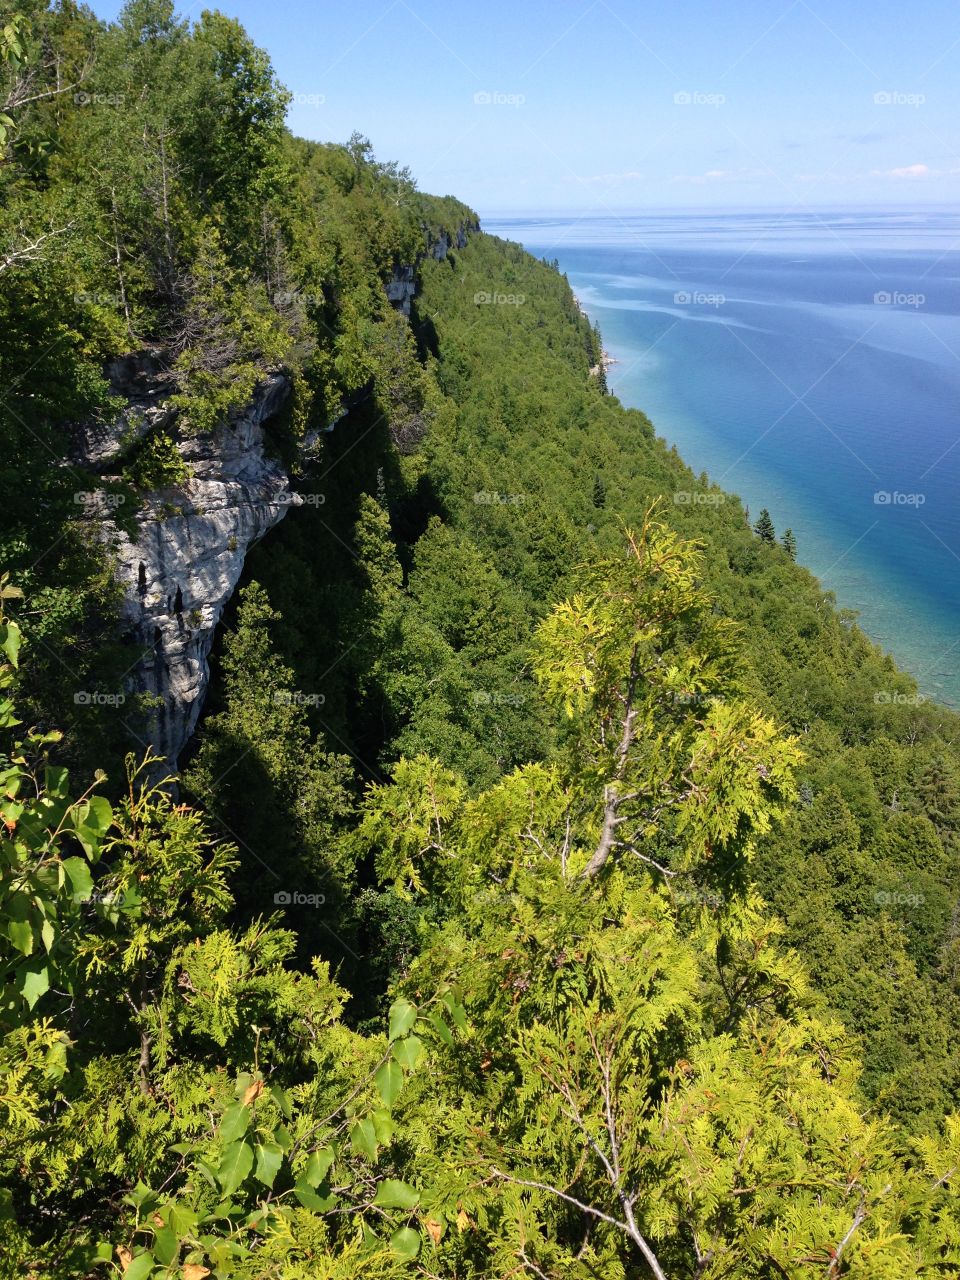 Hiking the rocky cliffs of Bruce